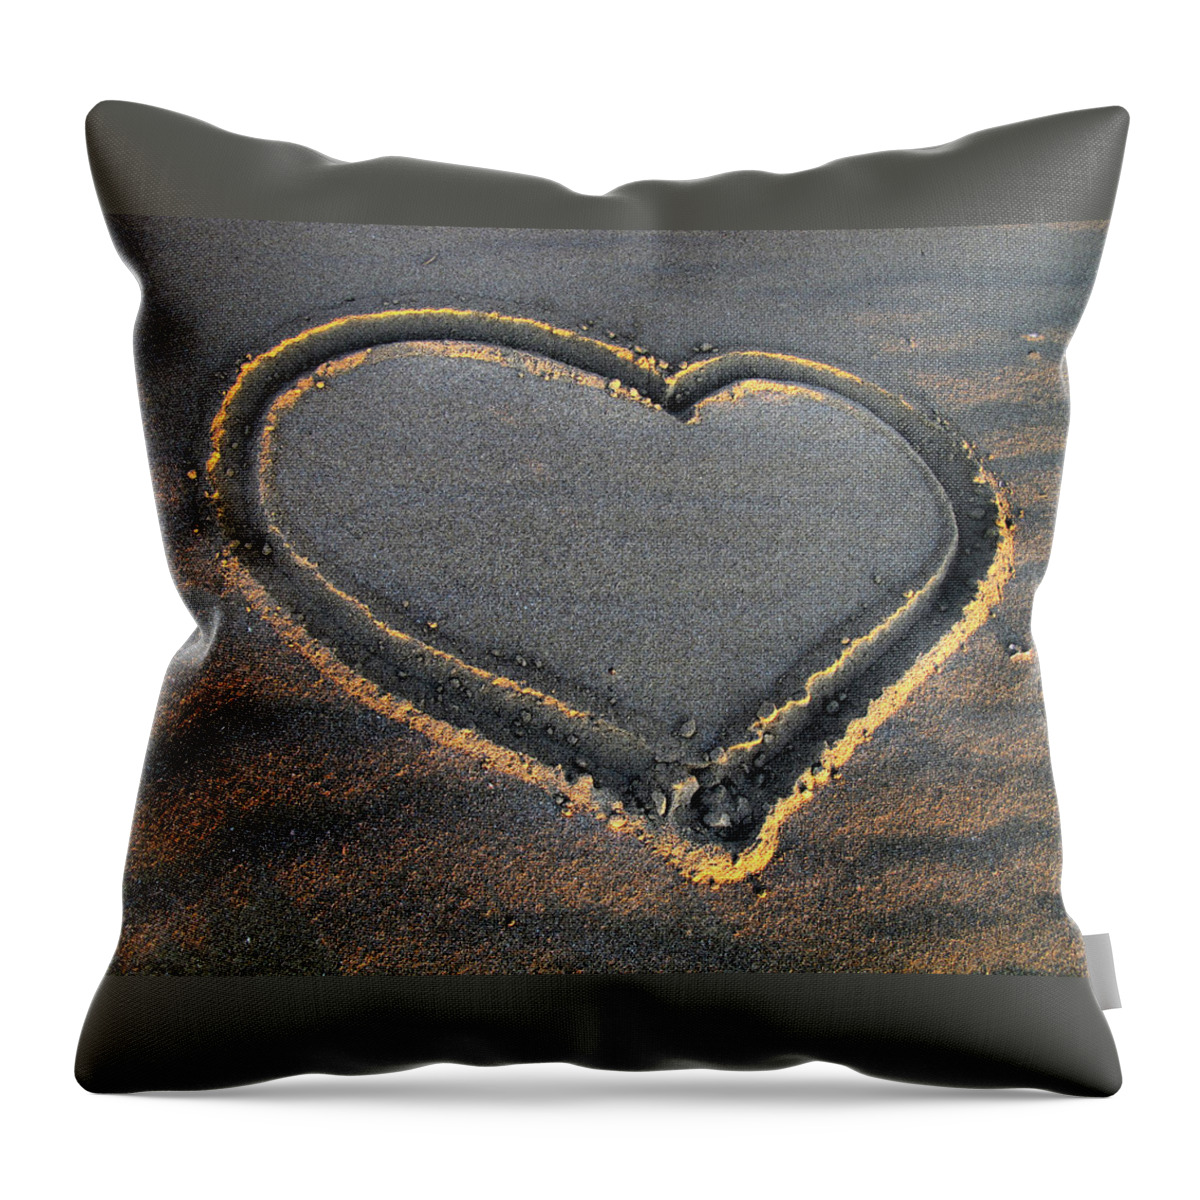 Valentine's Day Throw Pillow featuring the photograph Valentine's Day - Sand Heart by Daliana Pacuraru